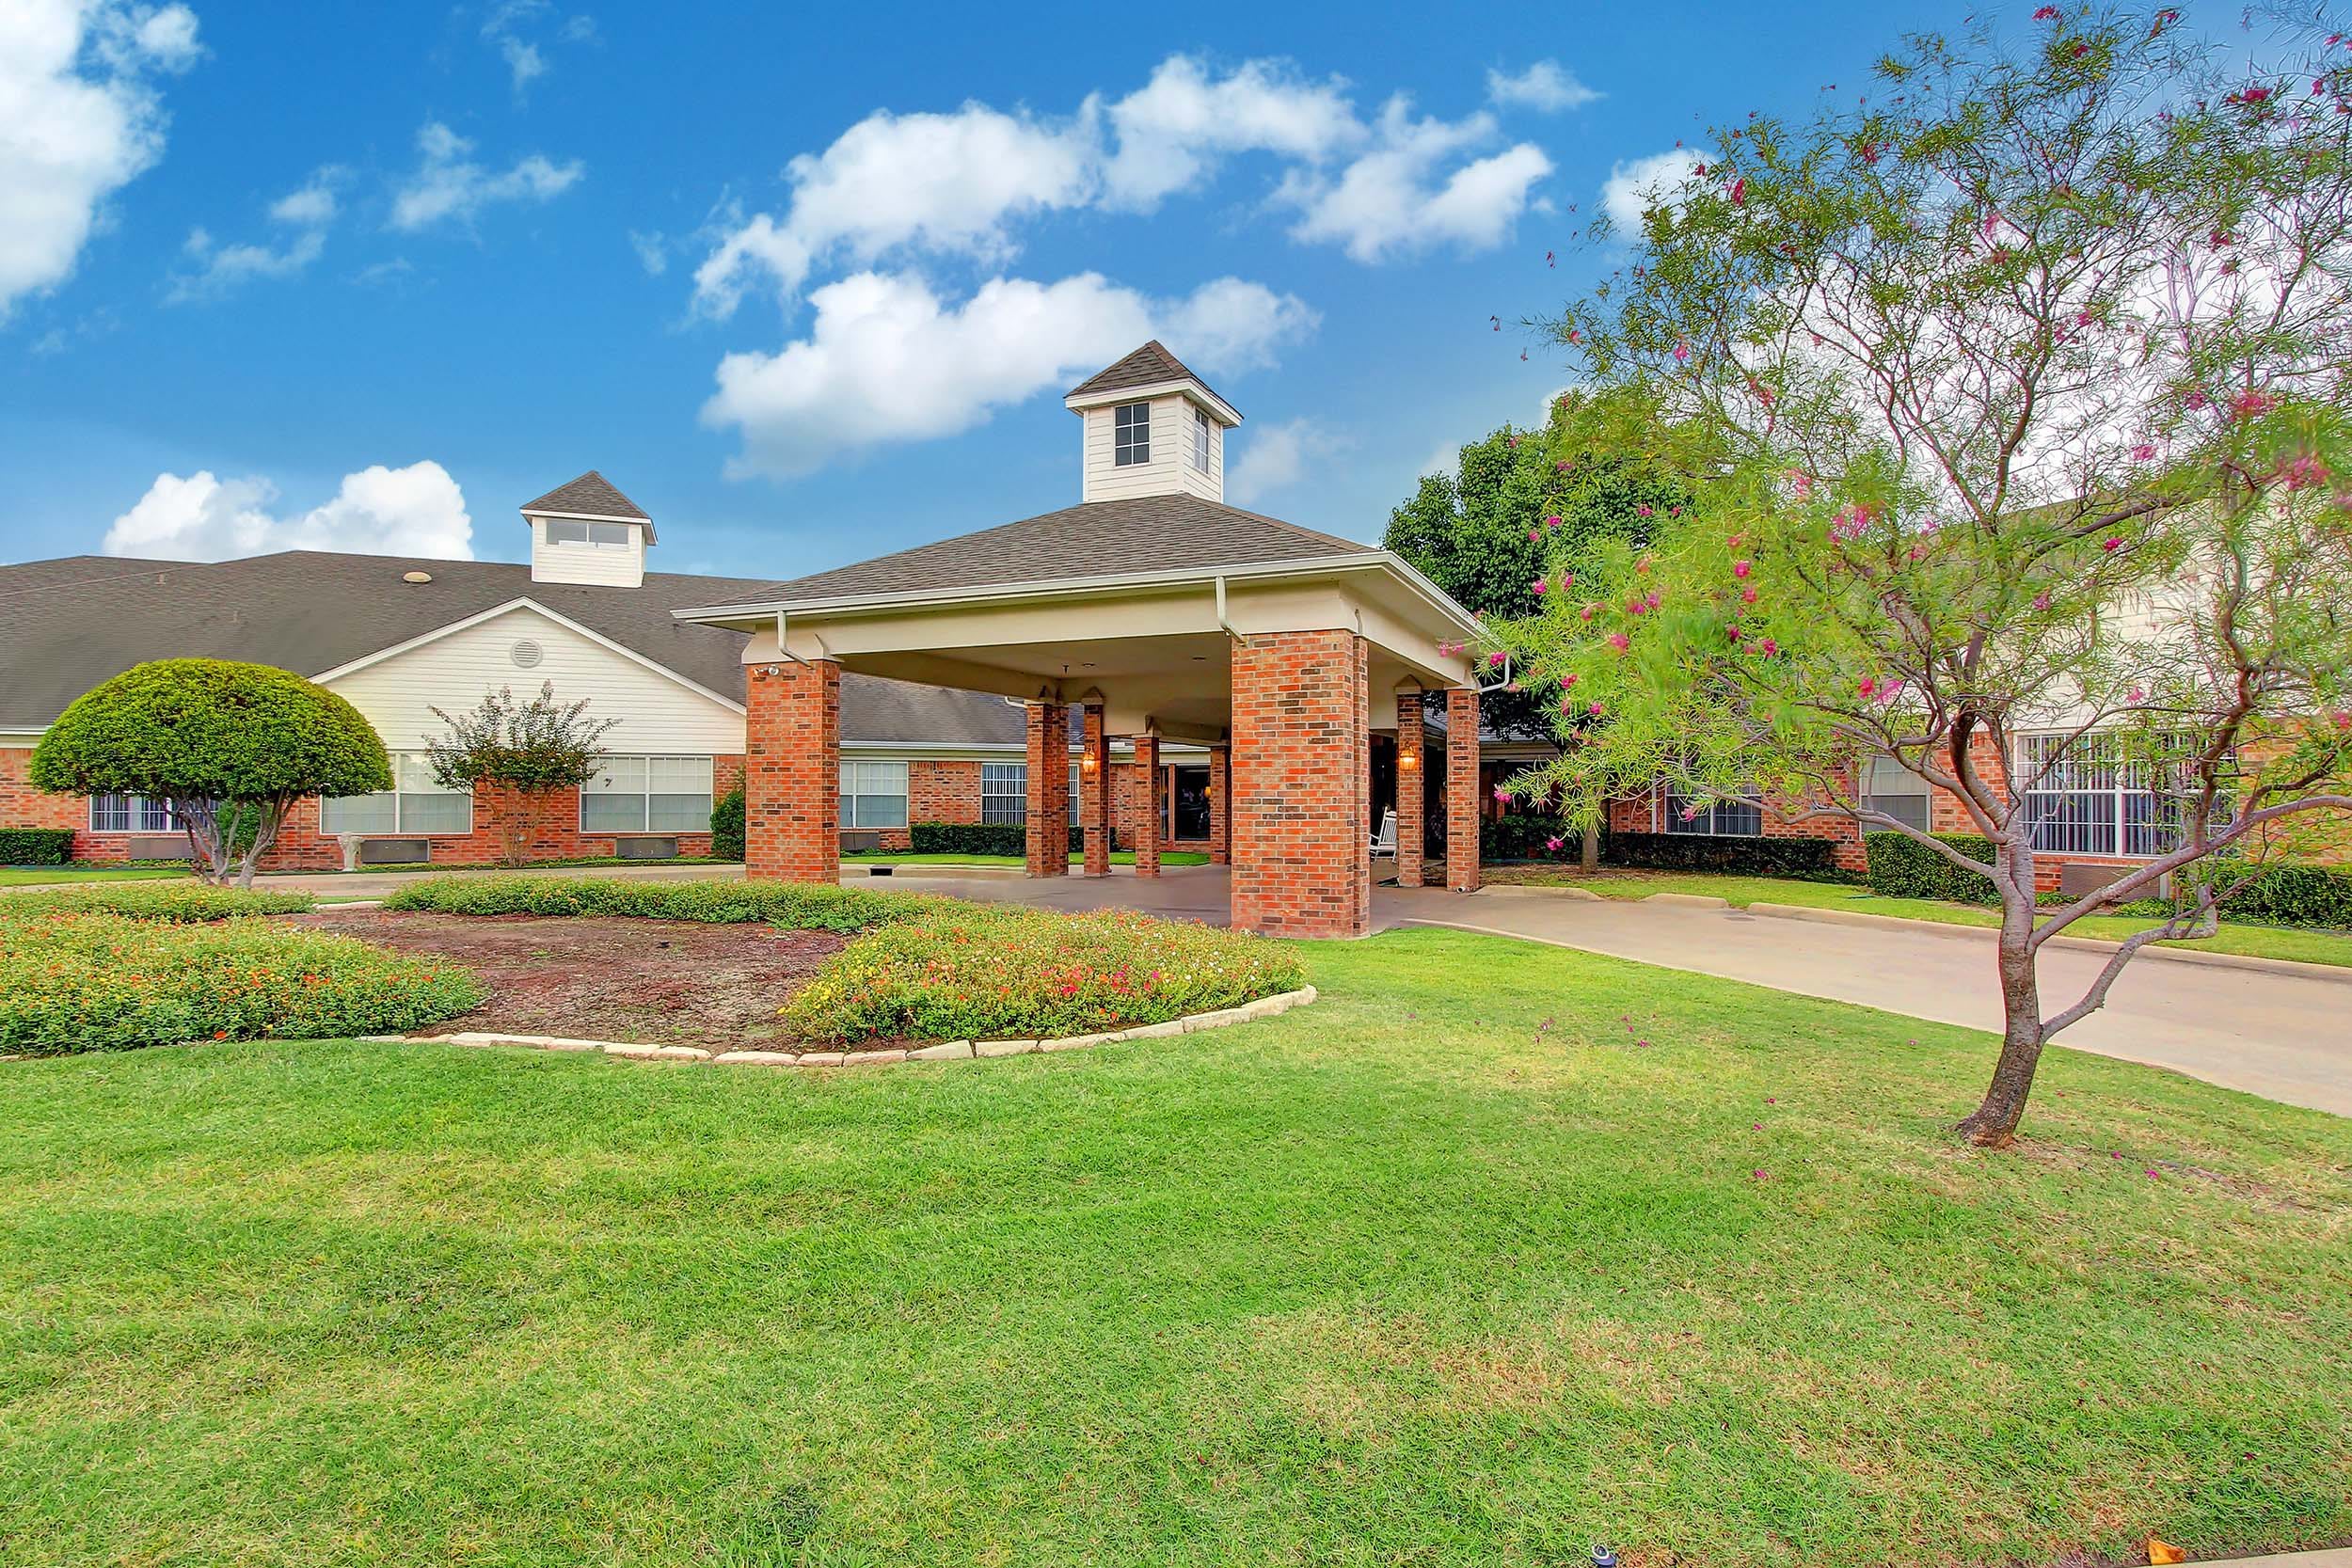 Free State Crestwood Assisted Living